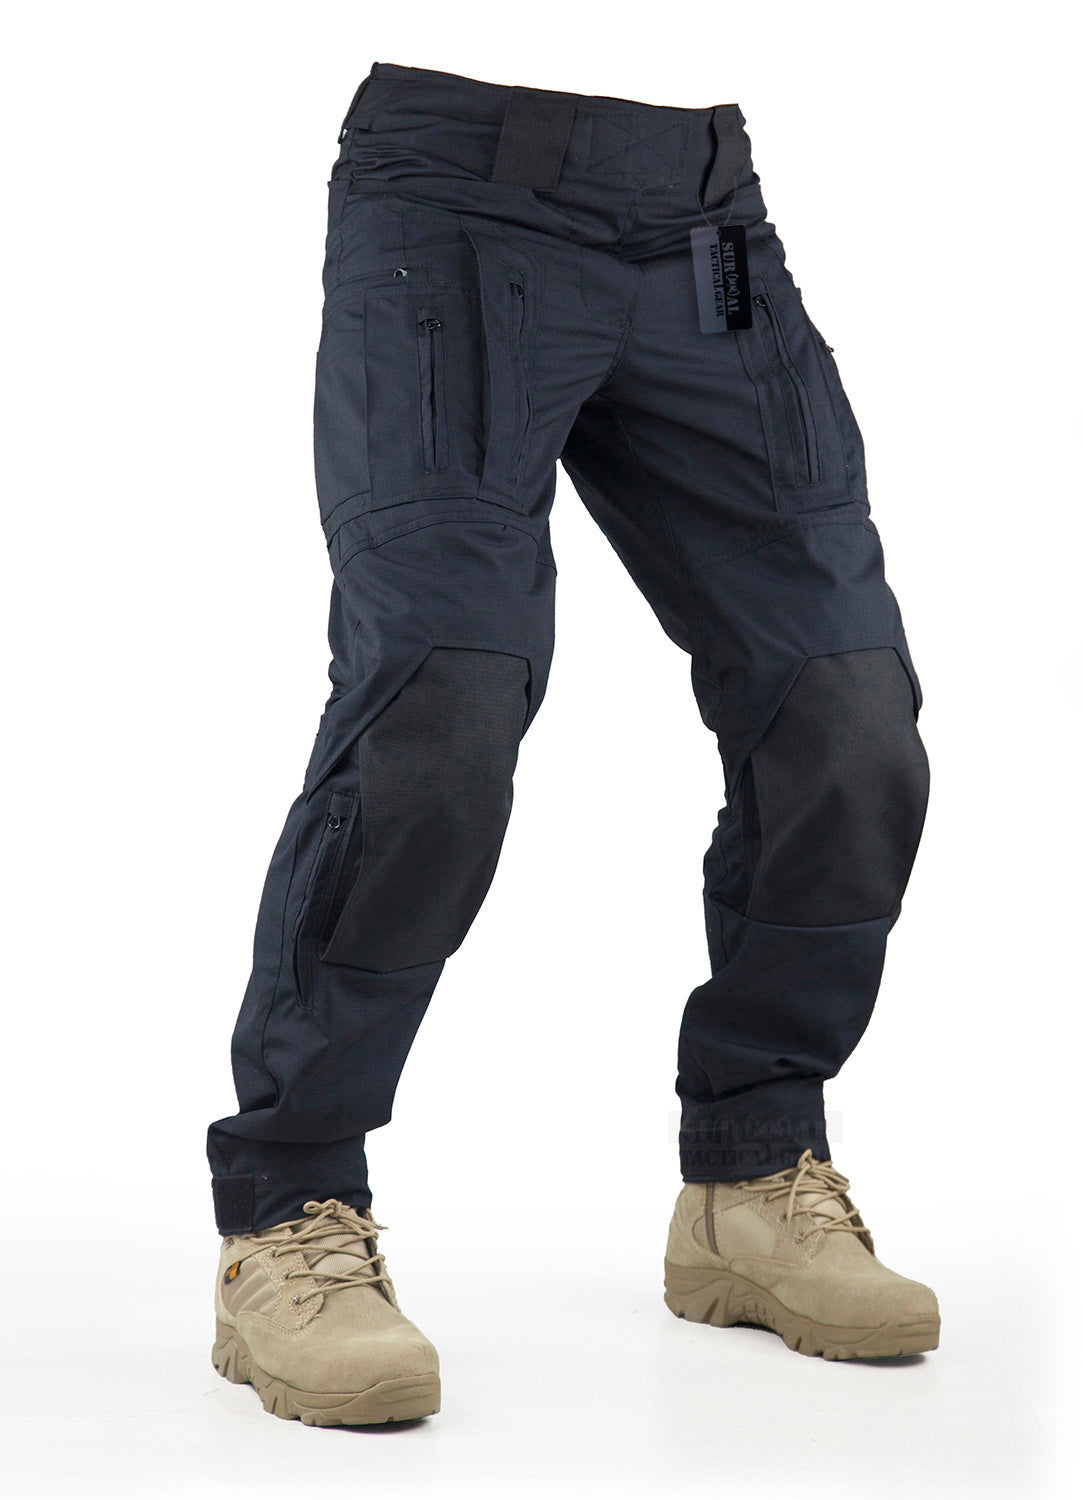 Survival Tactical Pants with Knee Pads